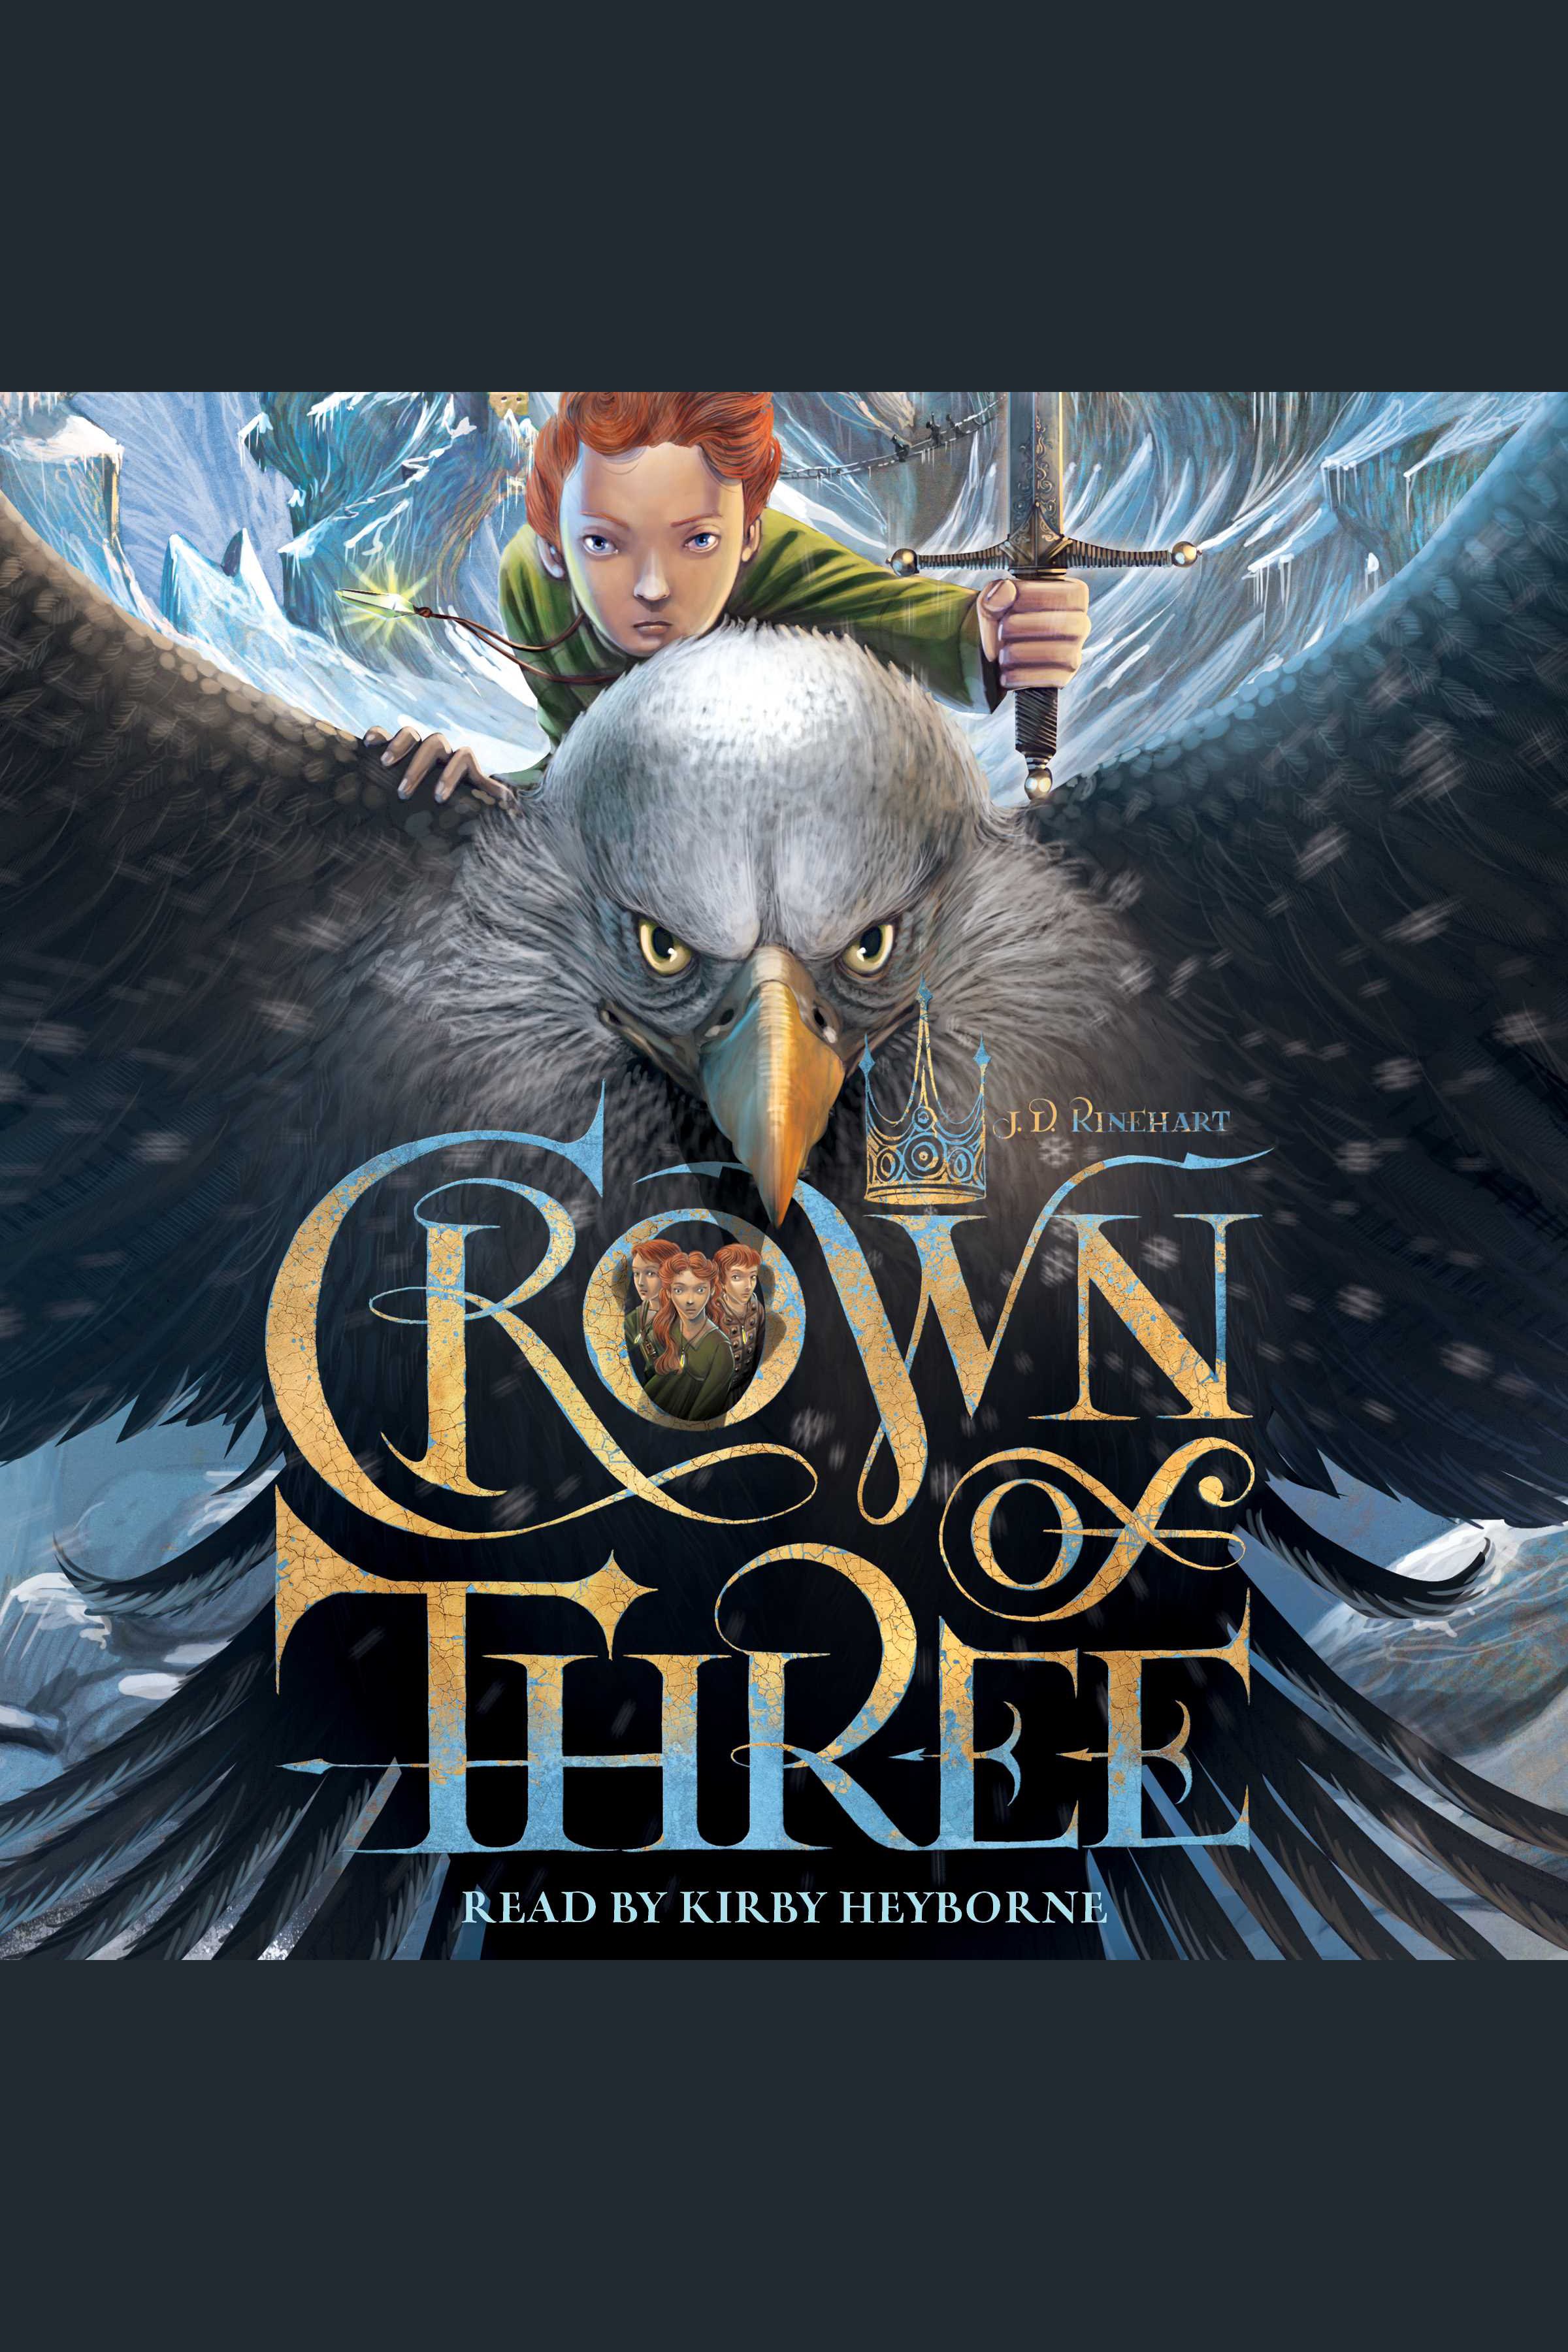 Crown of three cover image